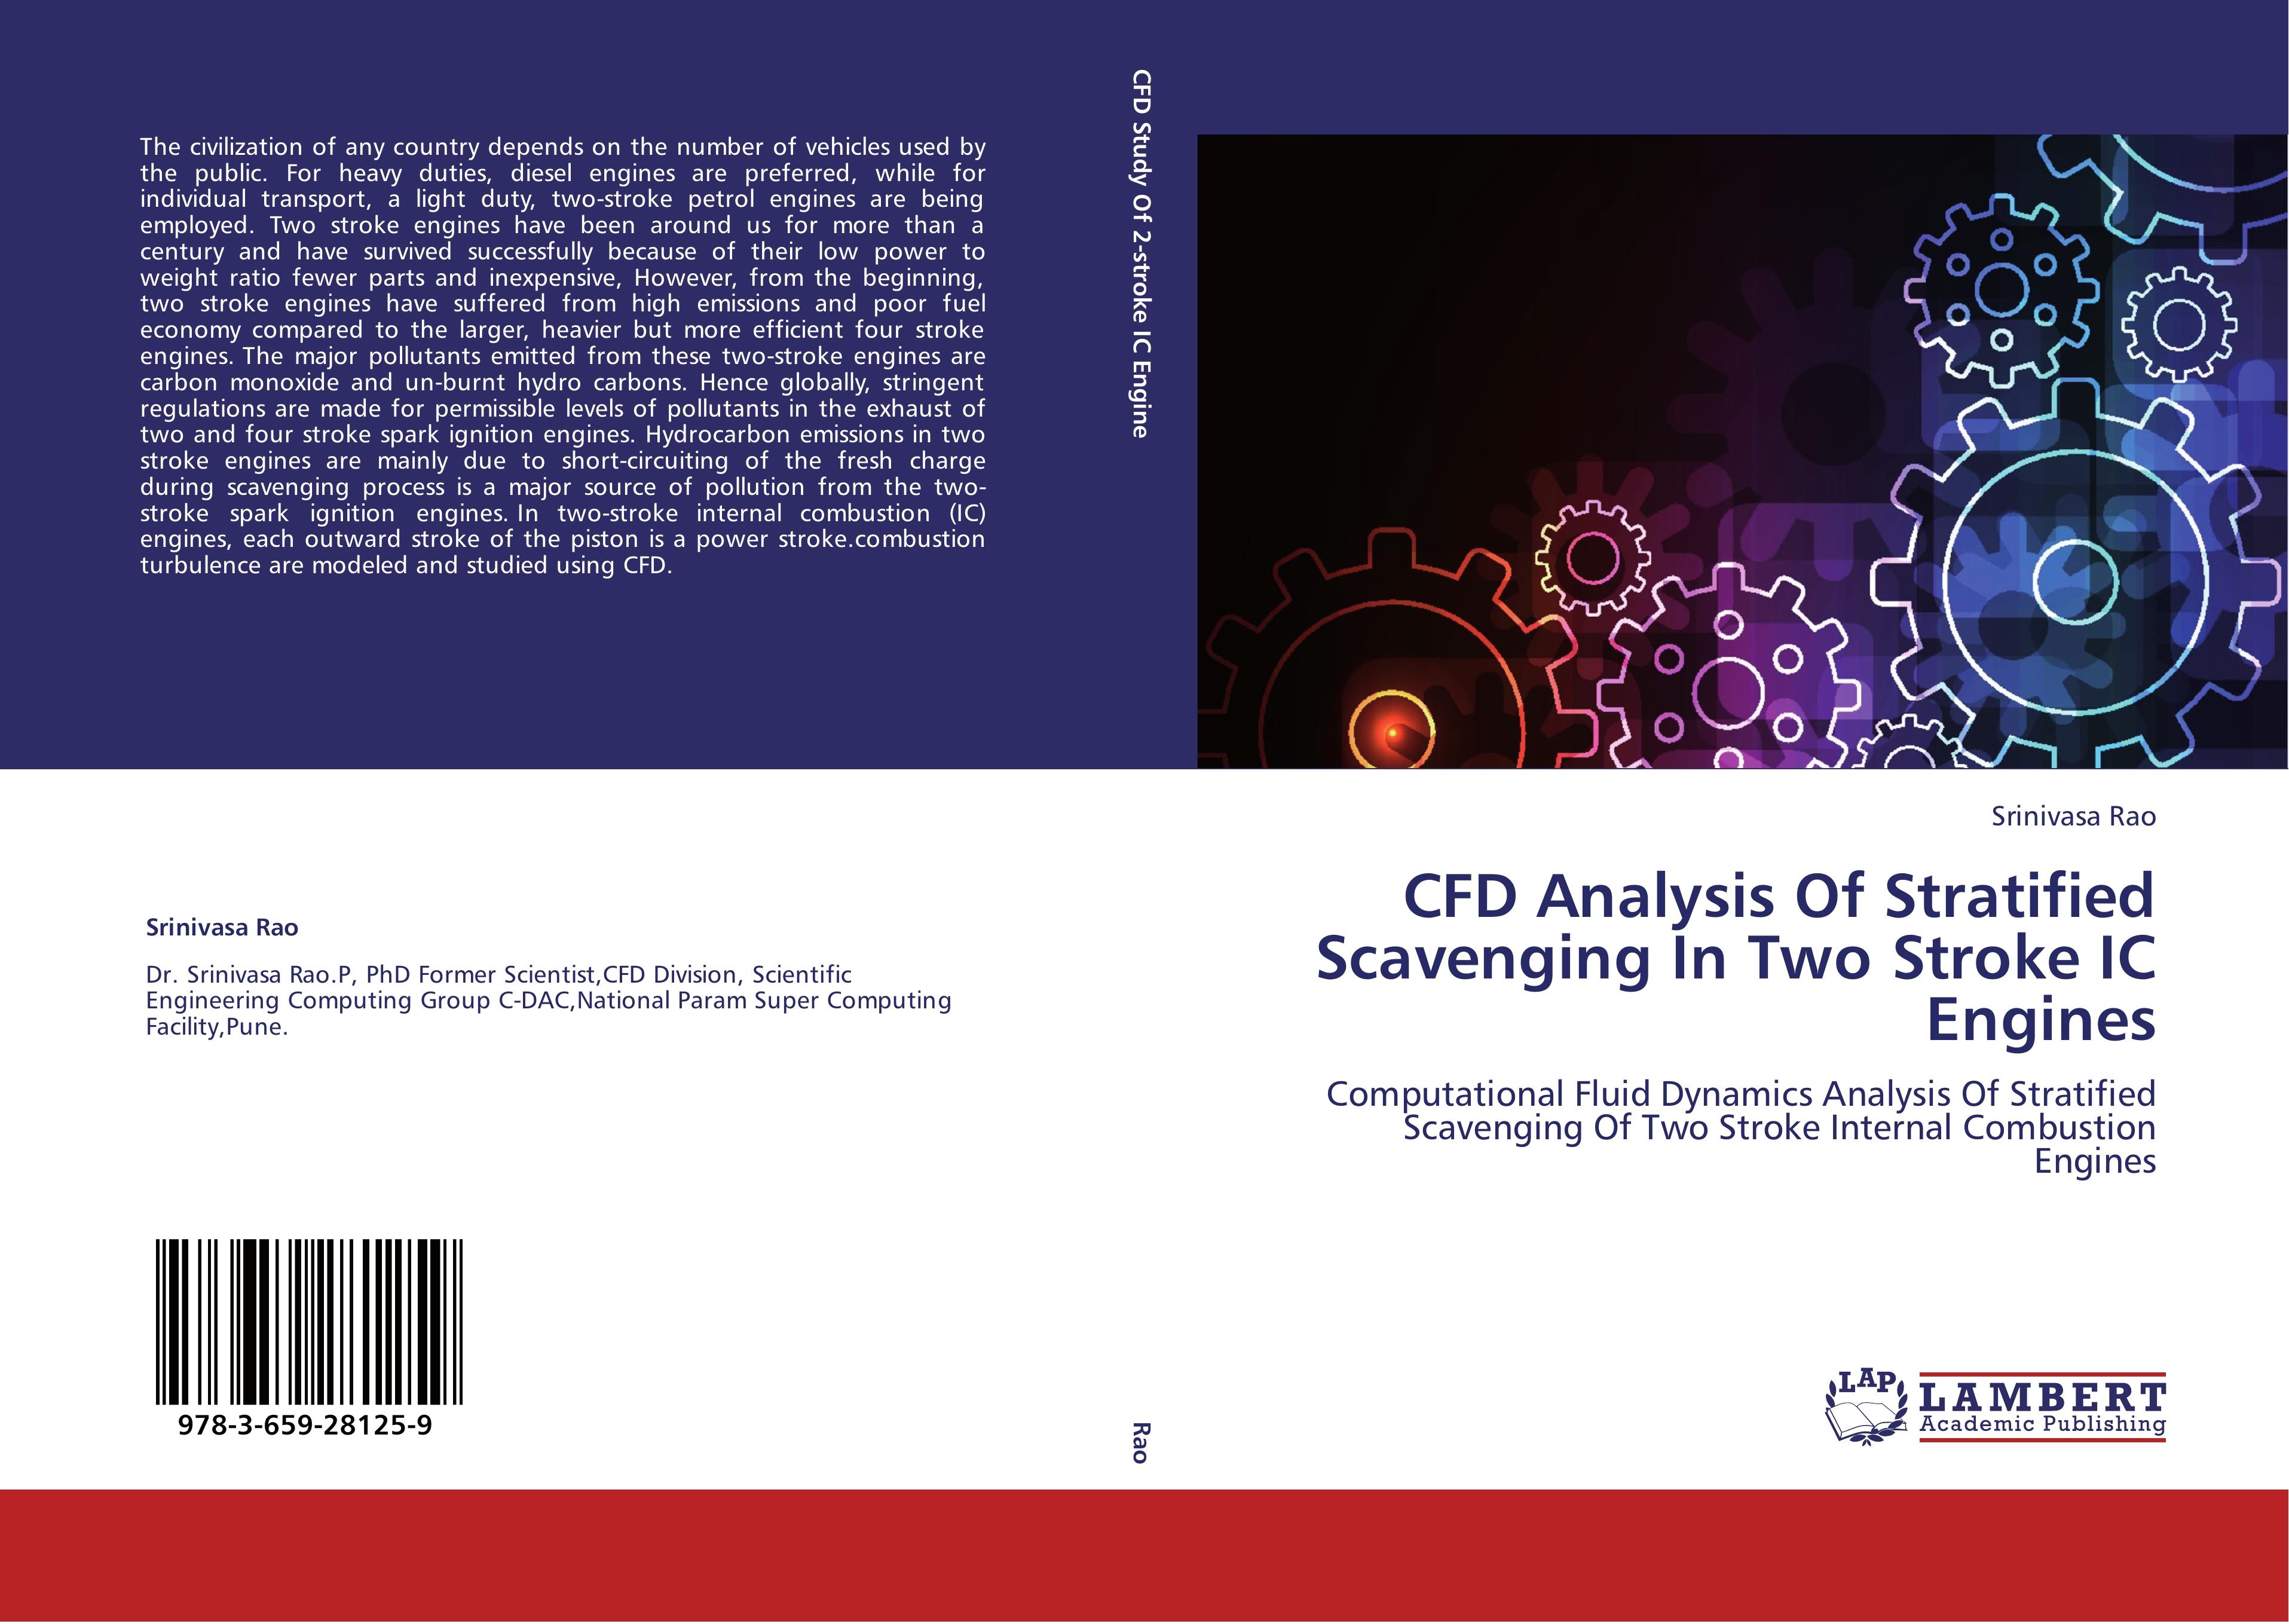 CFD Analysis Of Stratified Scavenging In Two Stroke IC Engines - Srinivasa Rao